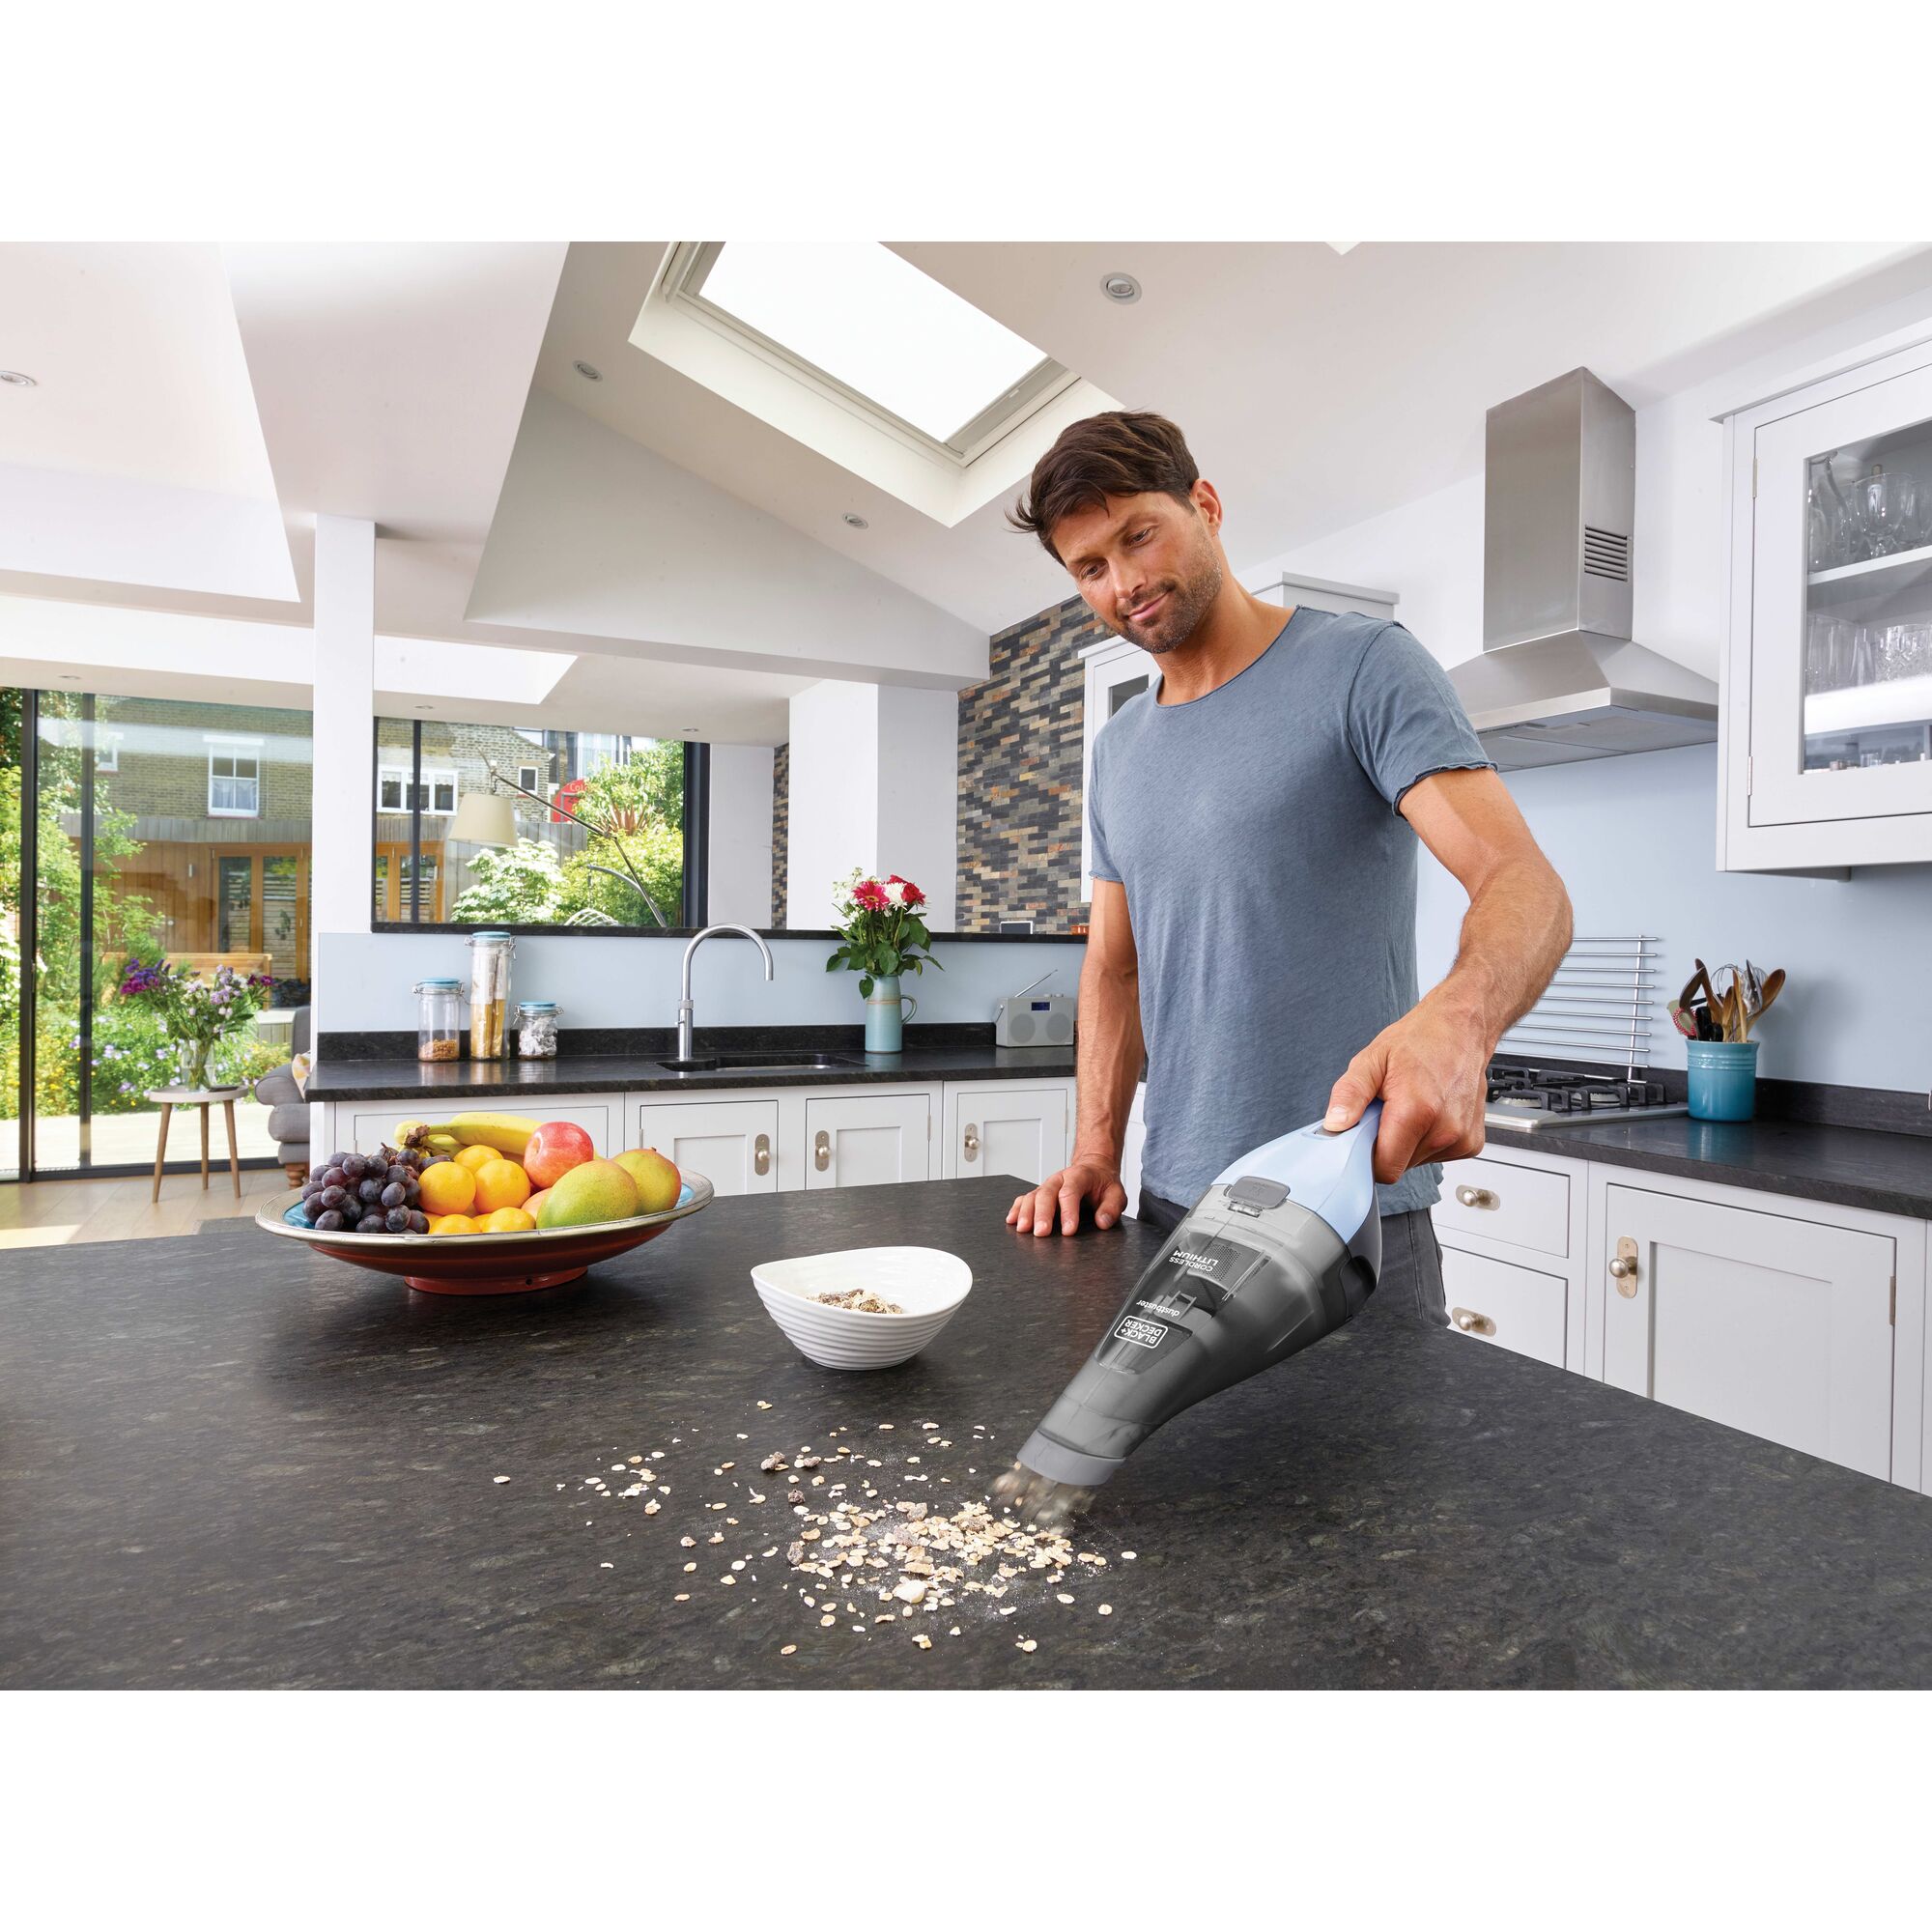 Dustbuster quick clean hand vacuum being used by a person to clean mess.\n